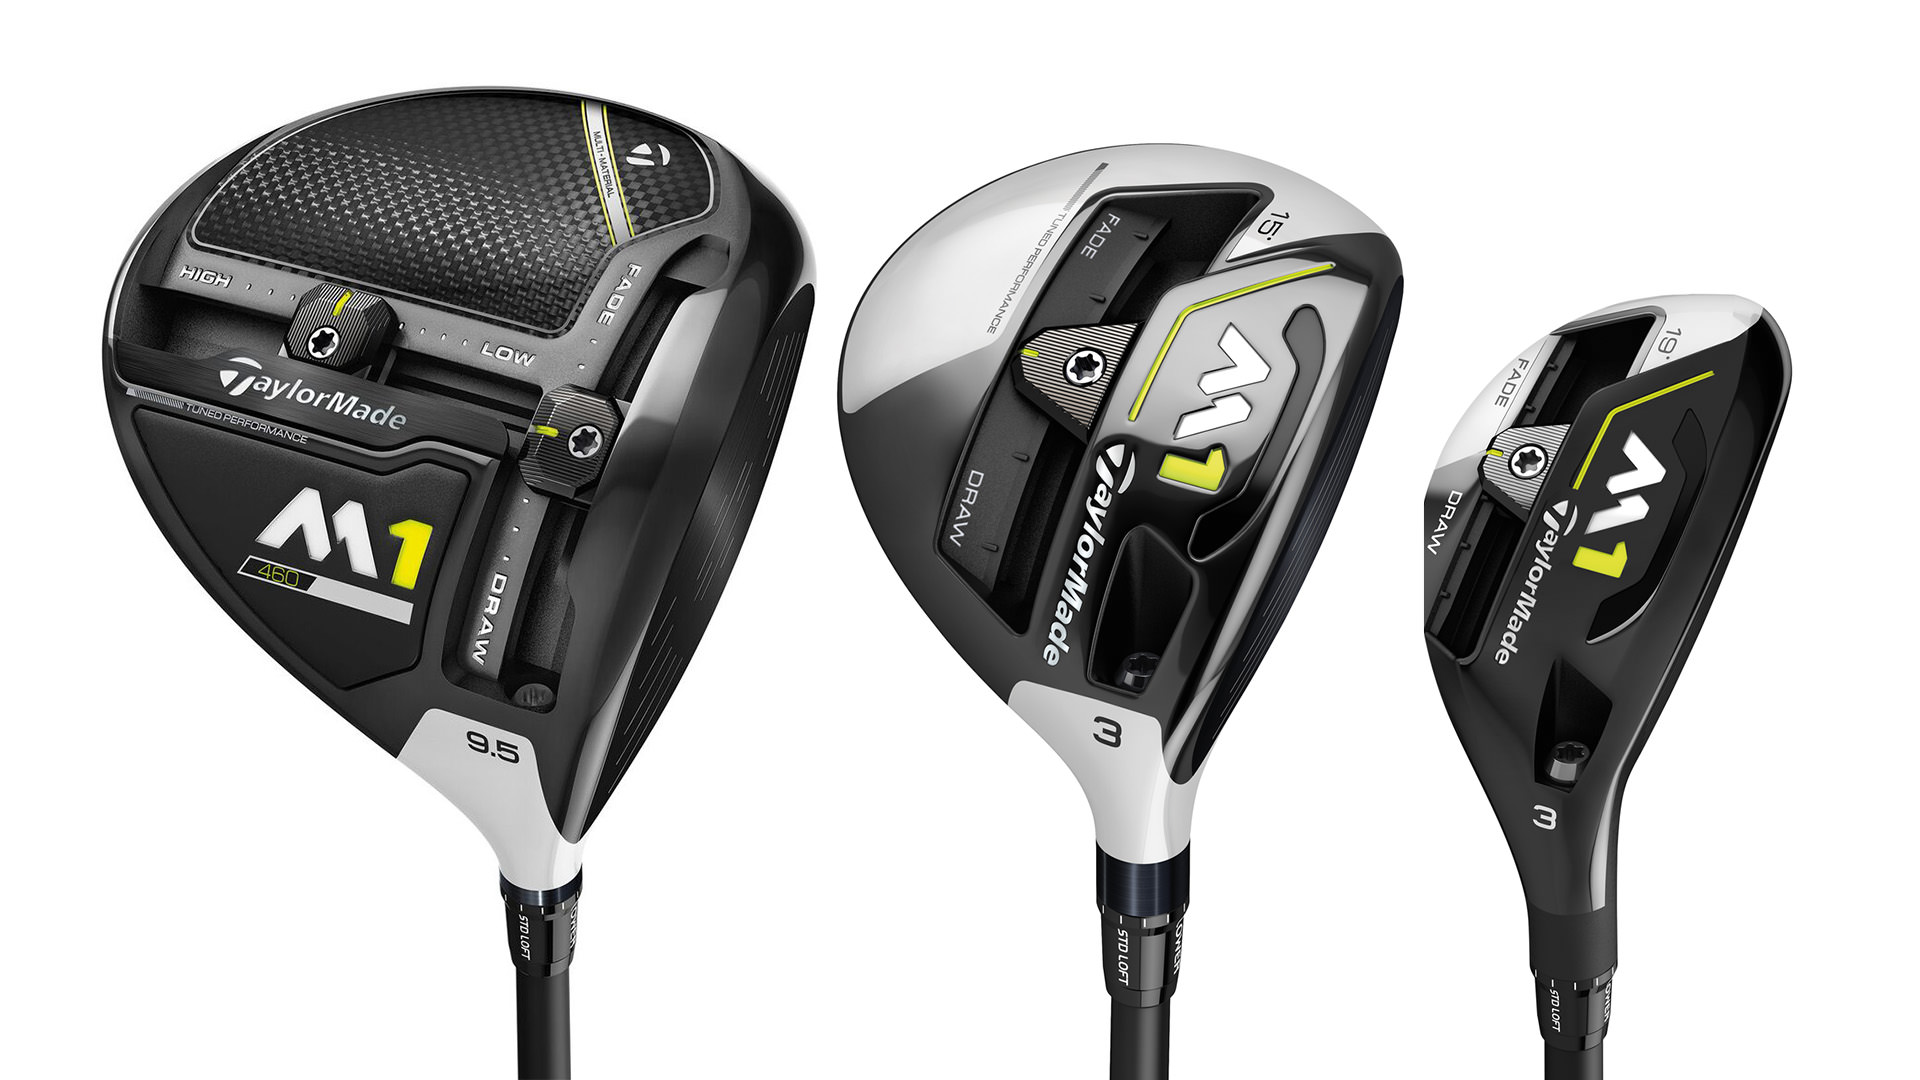 TaylorMade launch new M1 metalwoods: What's new?